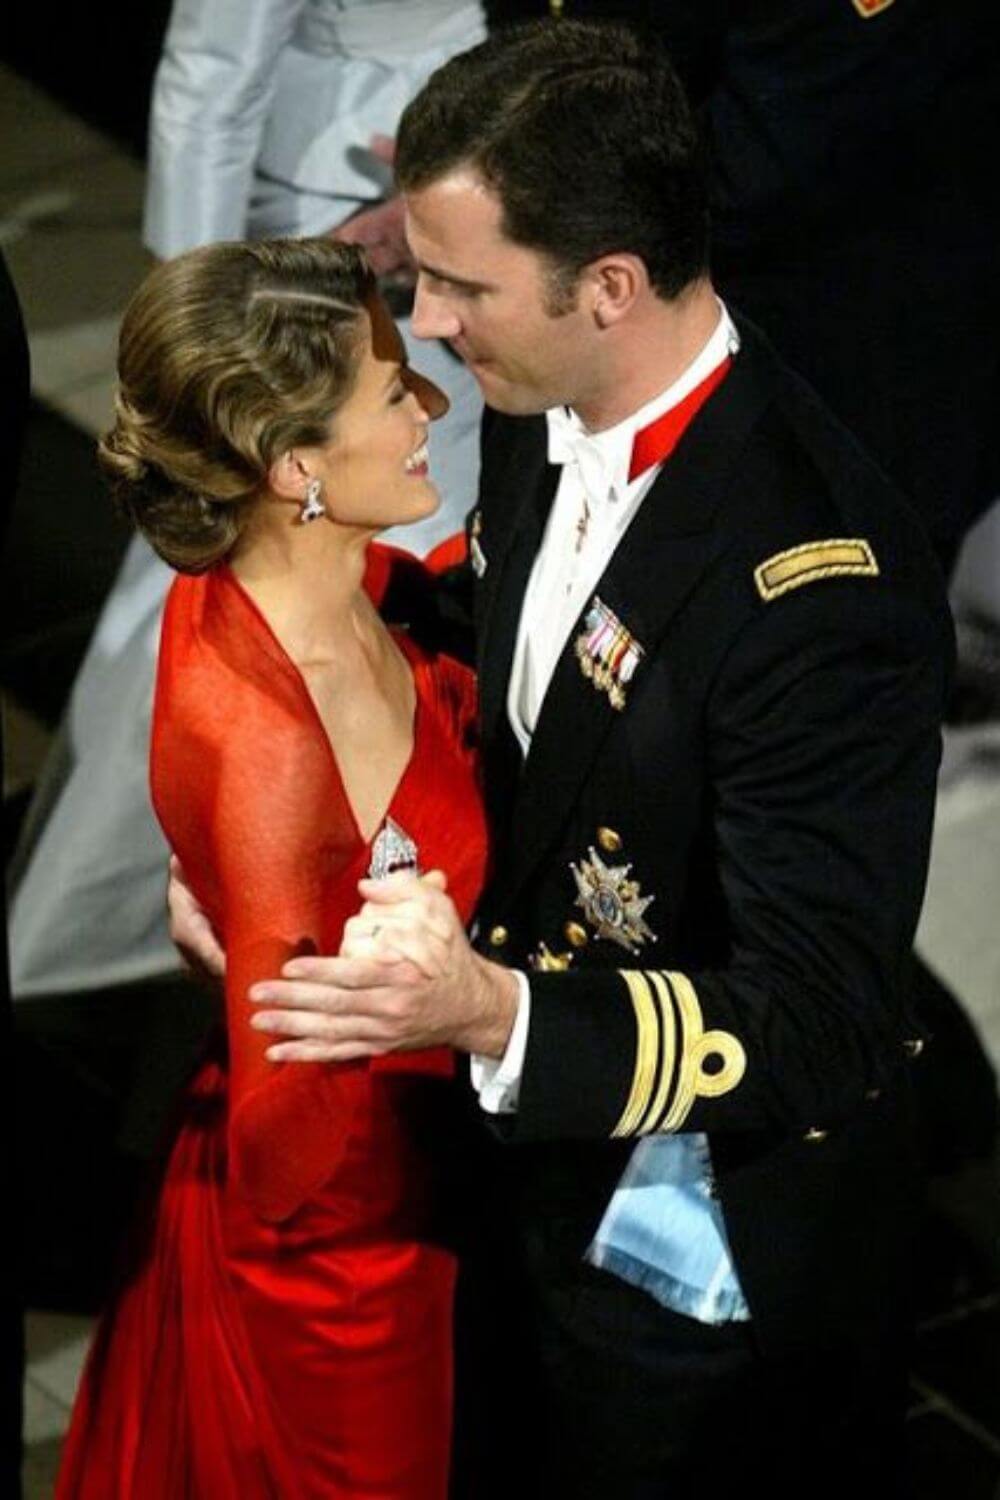 The royal couple dancing gracefully at a ball